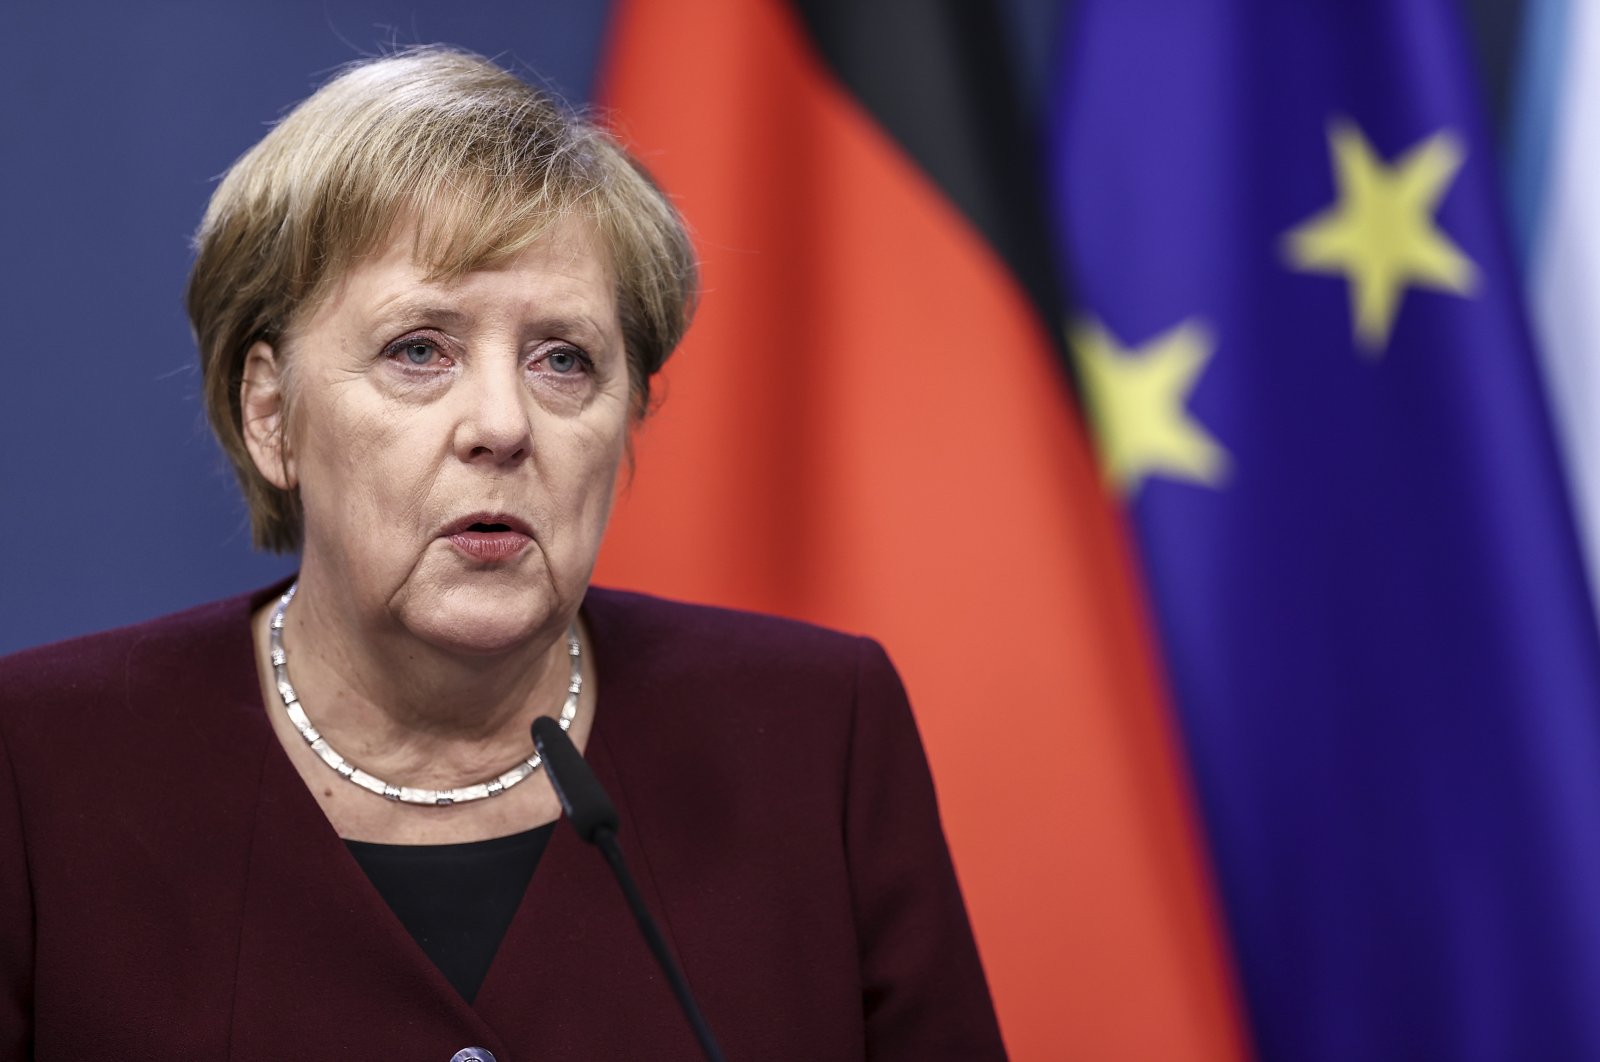 German Chancellor Angela Merkel speaks during a news conference at the end of an EU summit in Brussels, Belgium, Oct. 16, 2020. (AP Photo)